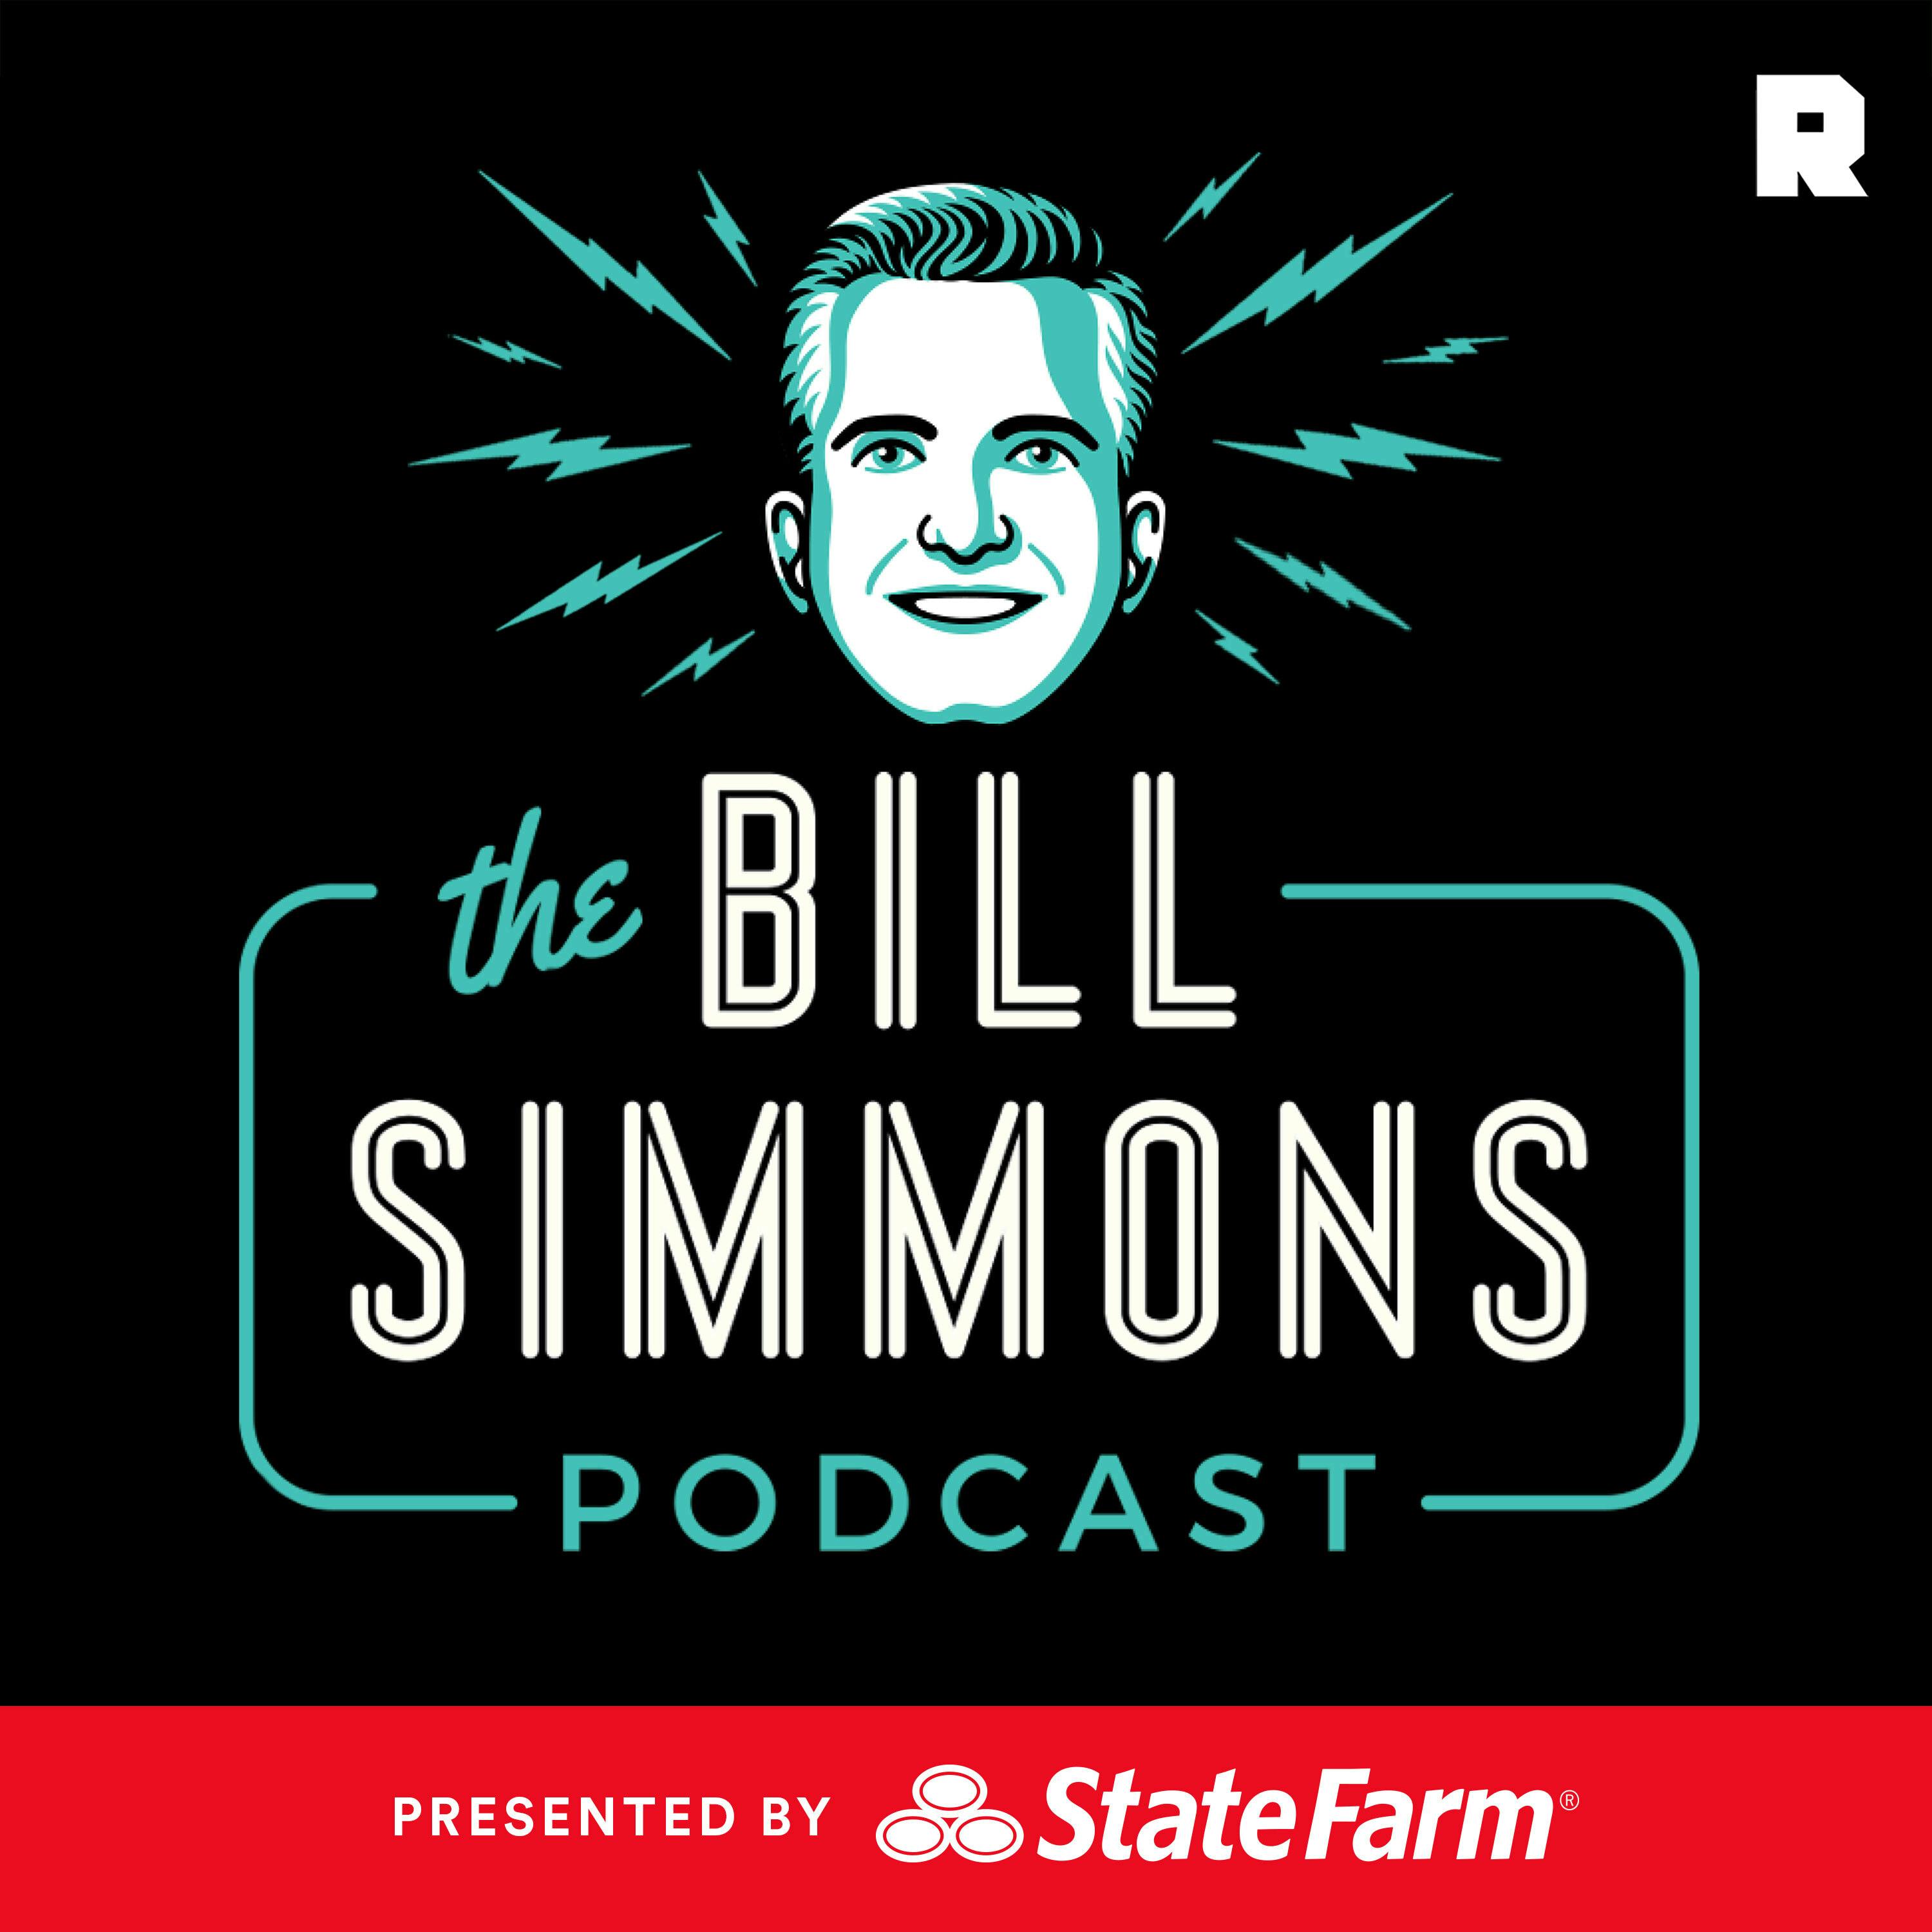 The Bill Simmons Podcast podcast